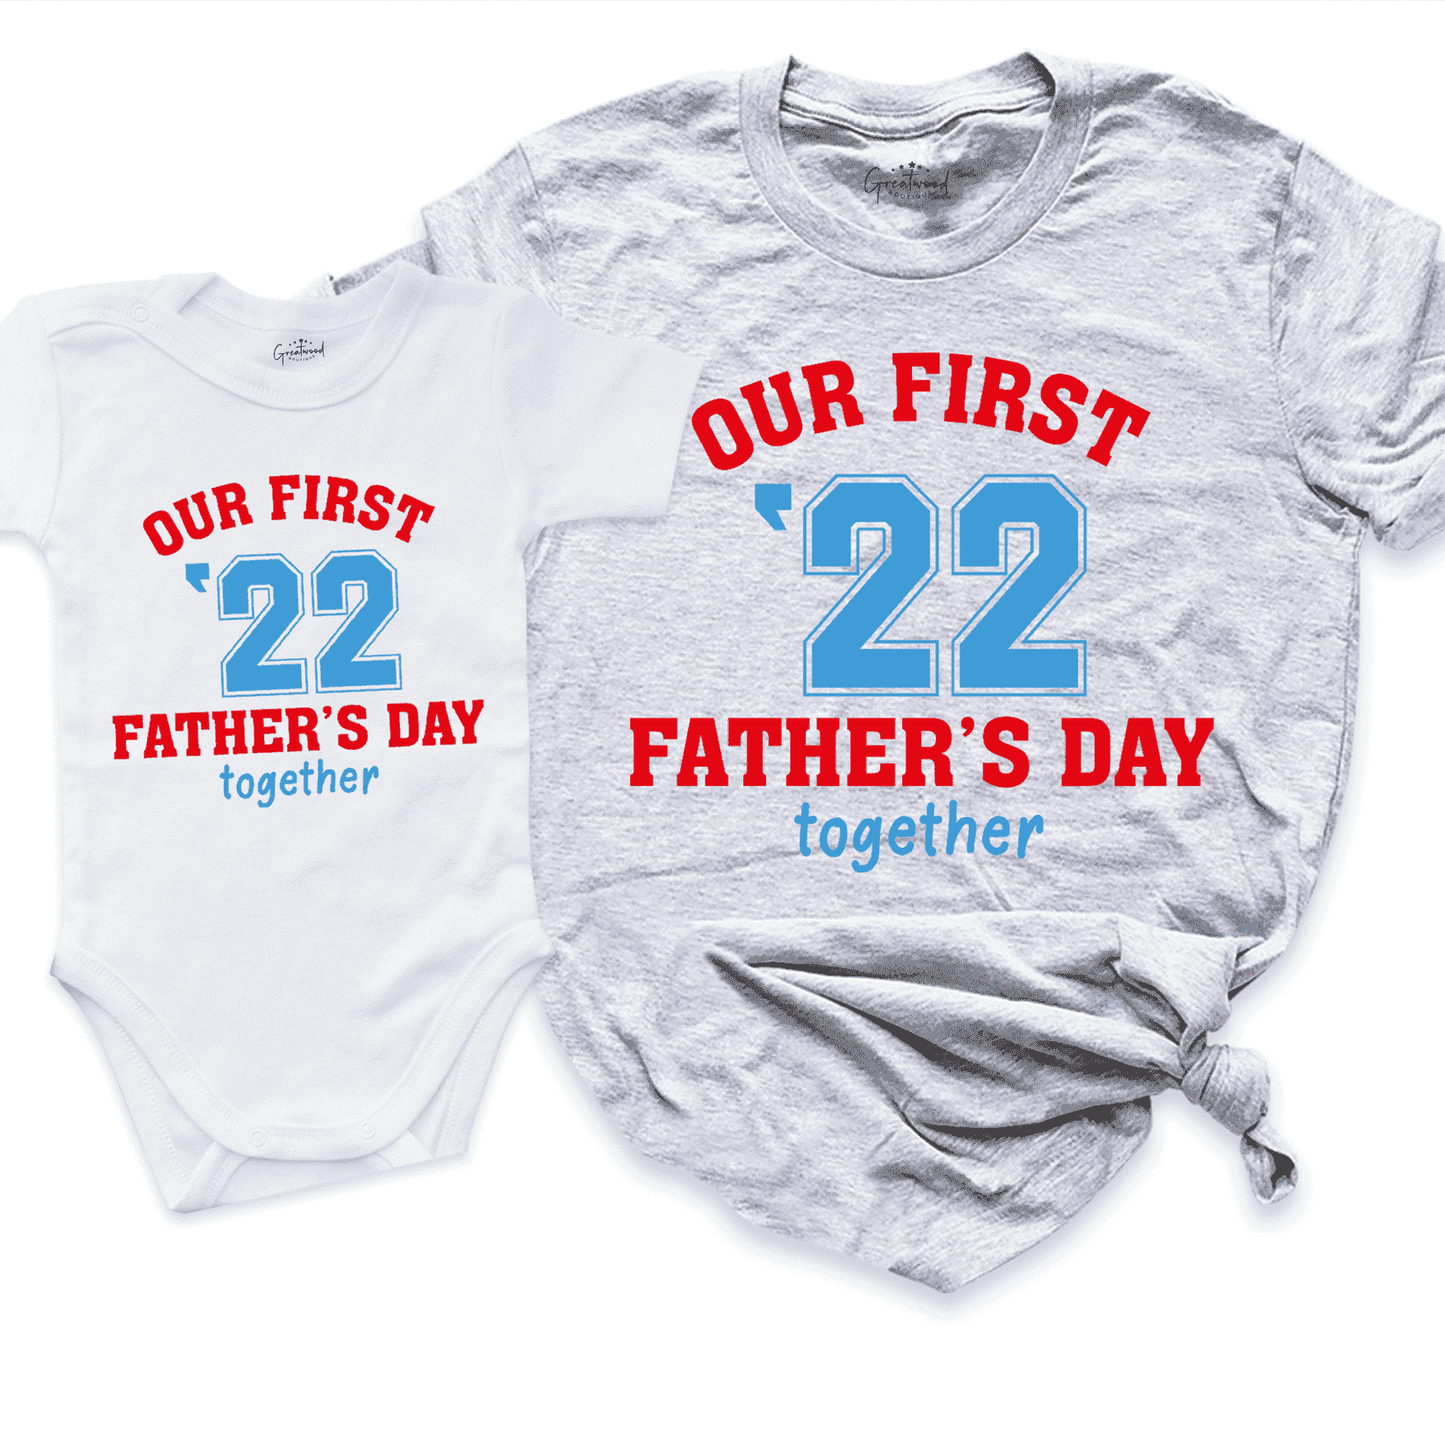 Our First Father's Day Together Shirt Grey - Greatwood boutique